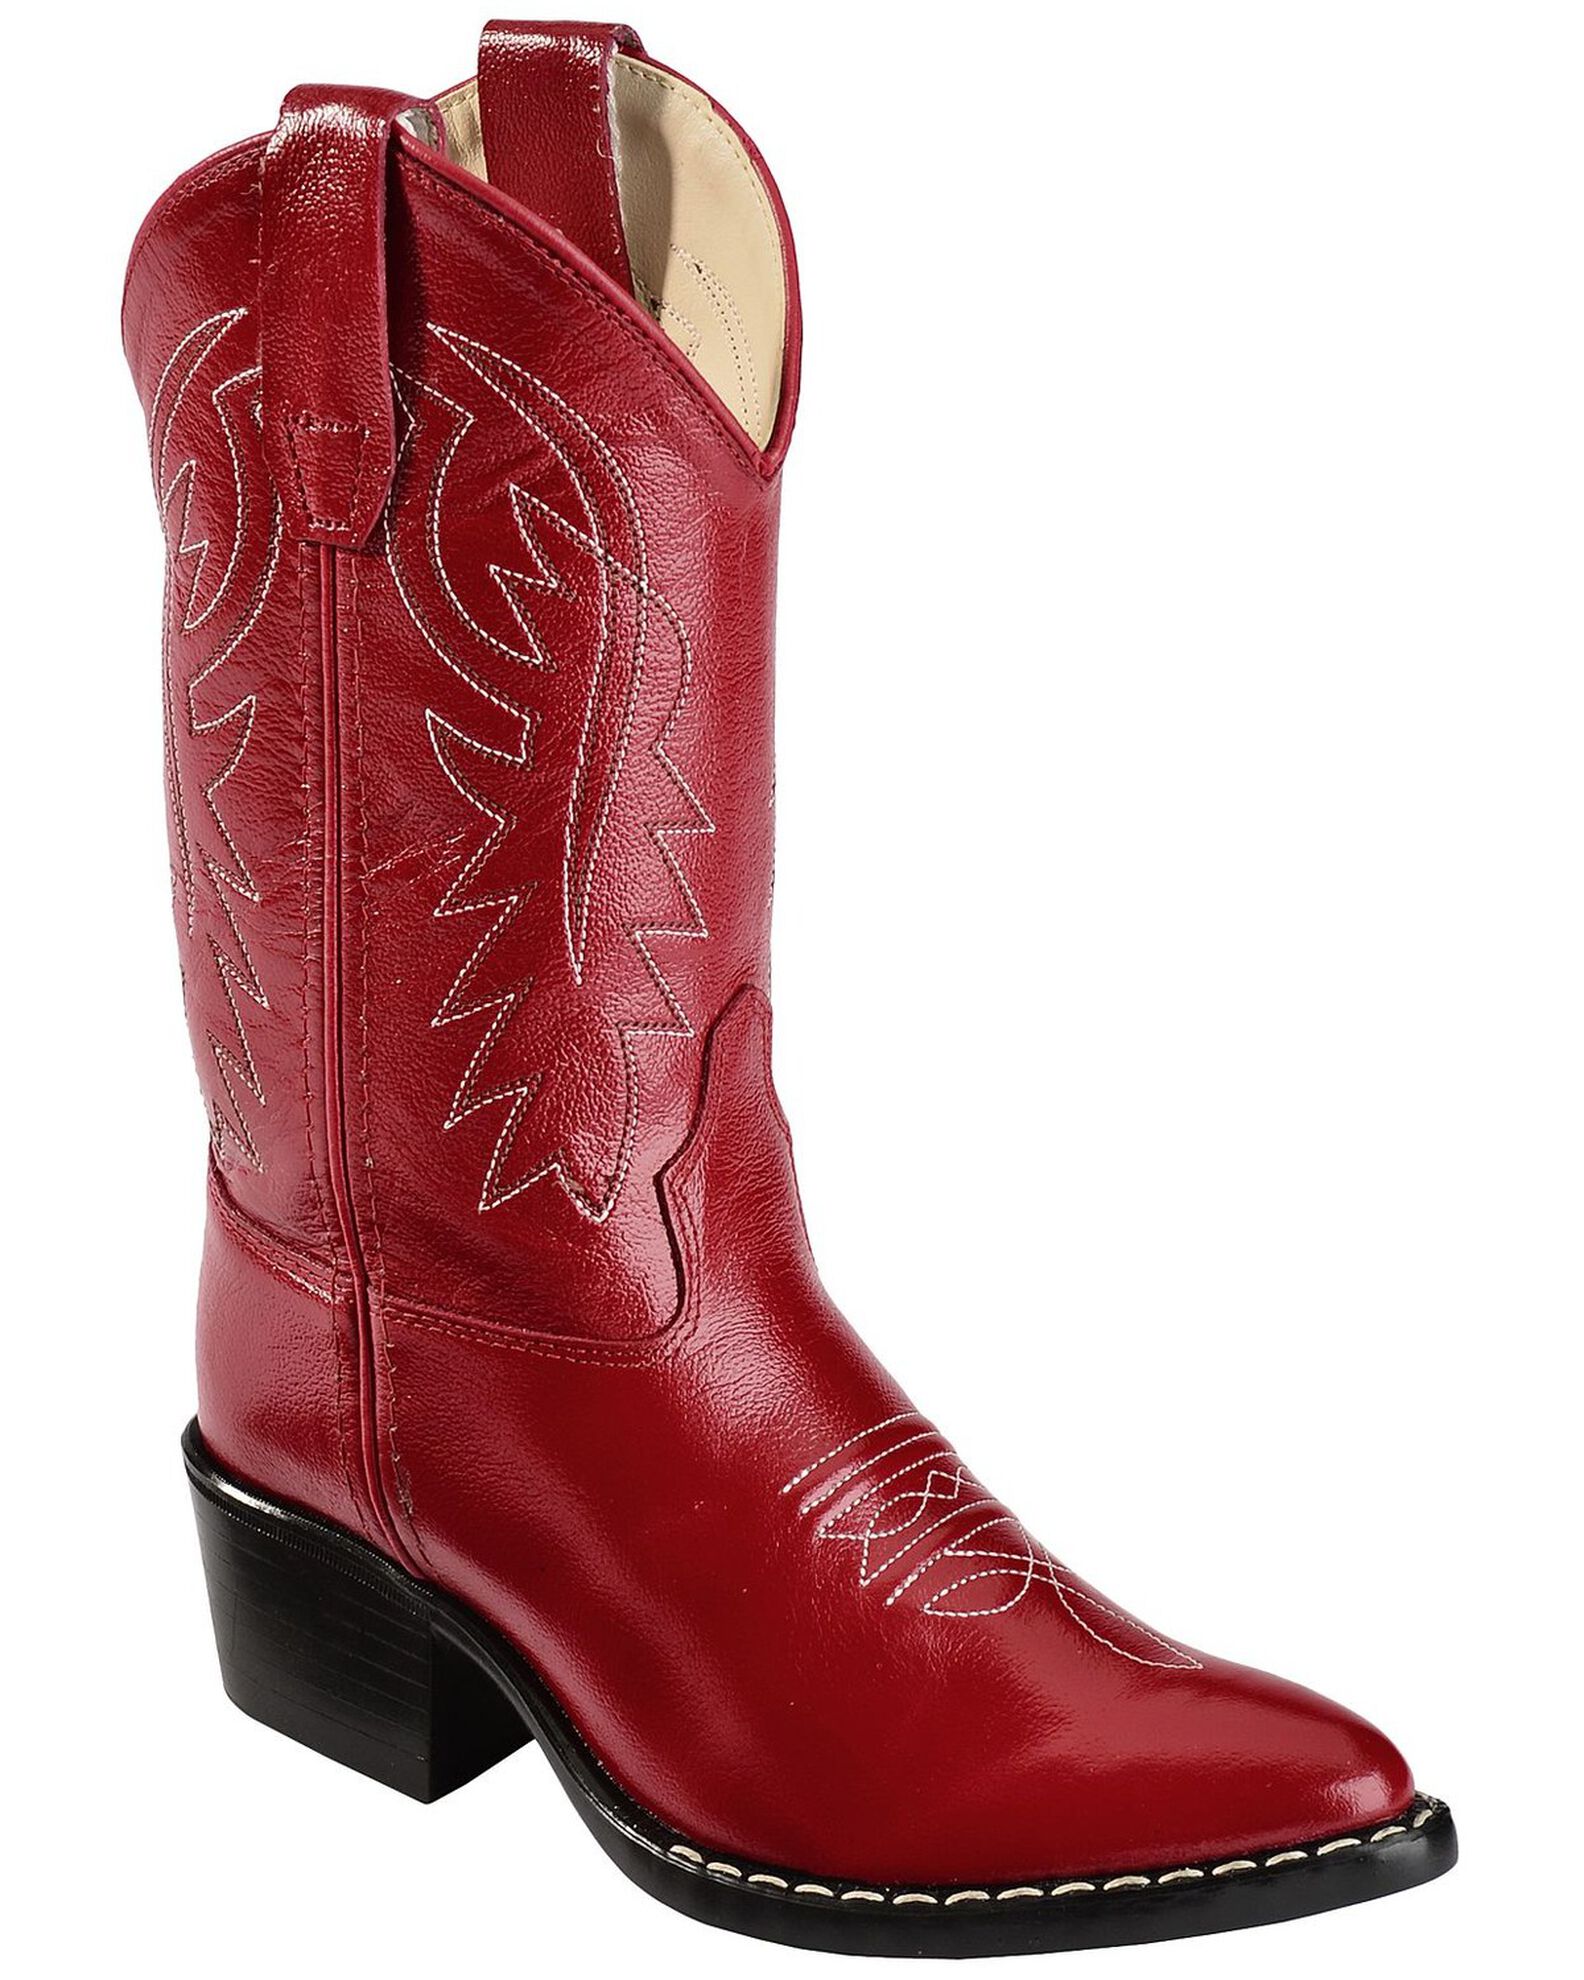 Old West Girls' Red Leather Western Boots - Pointed Toe